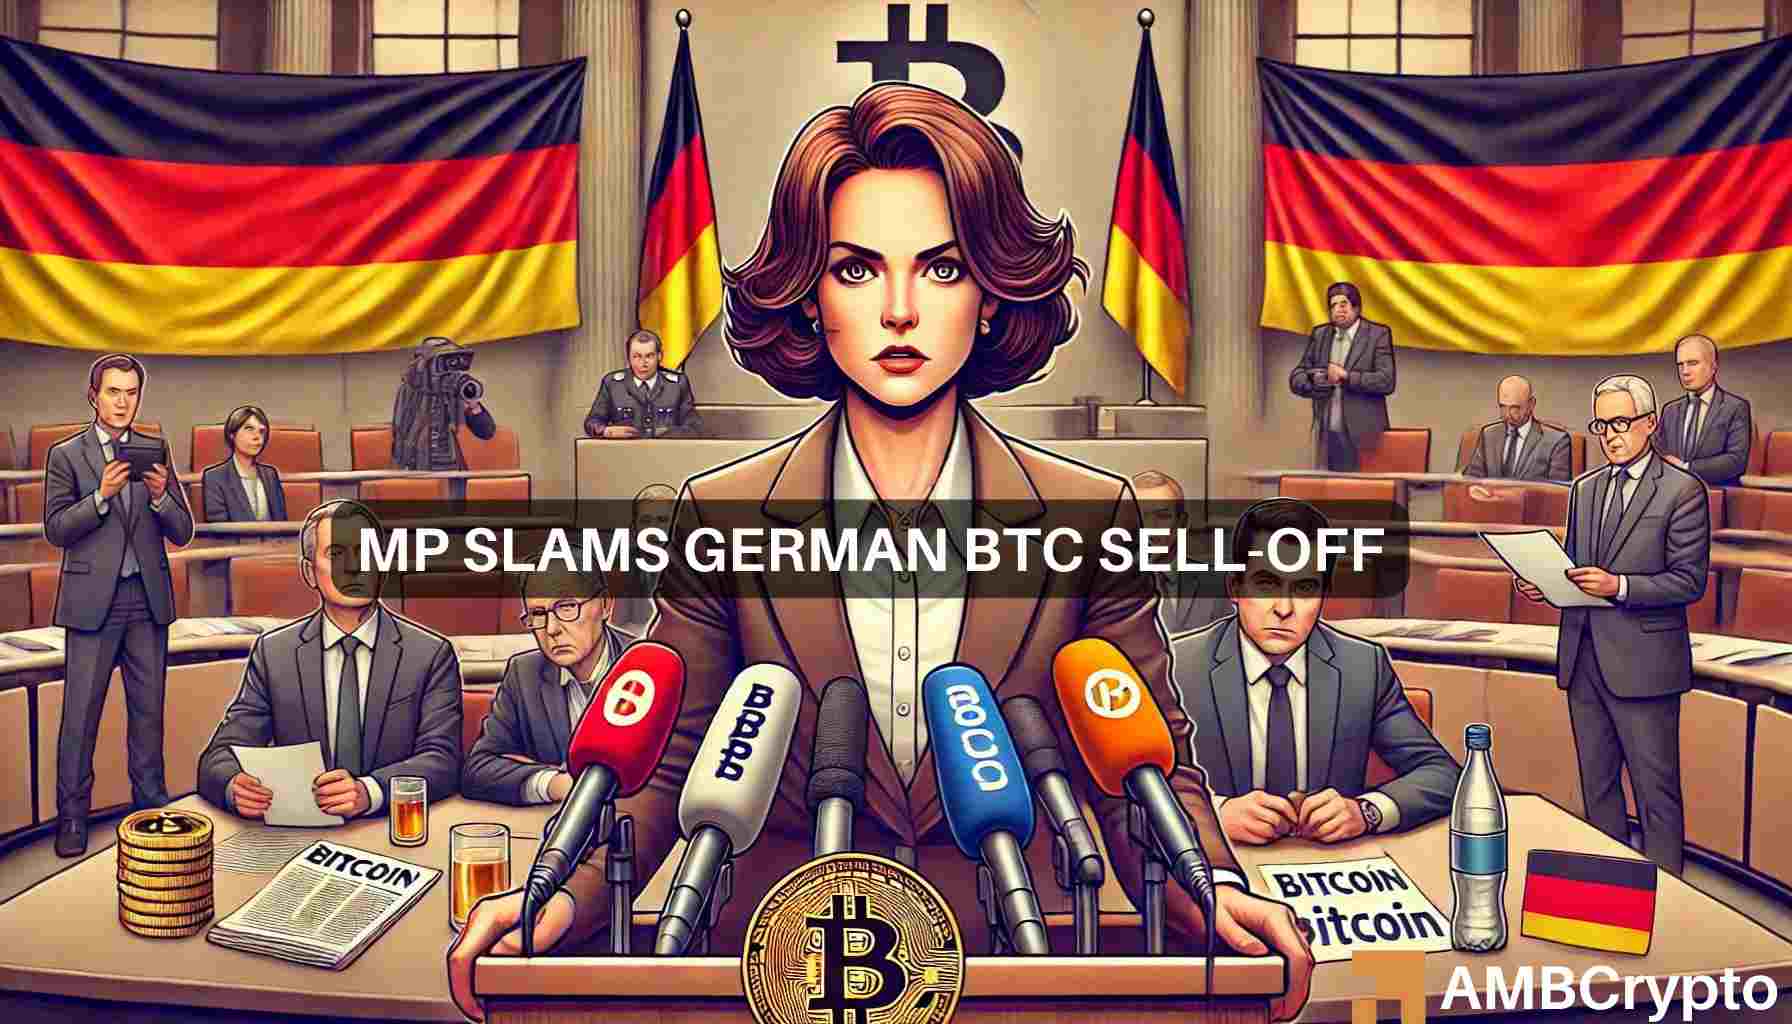 Stop selling German Bitcoin, do this instead: MP Joana Cotar